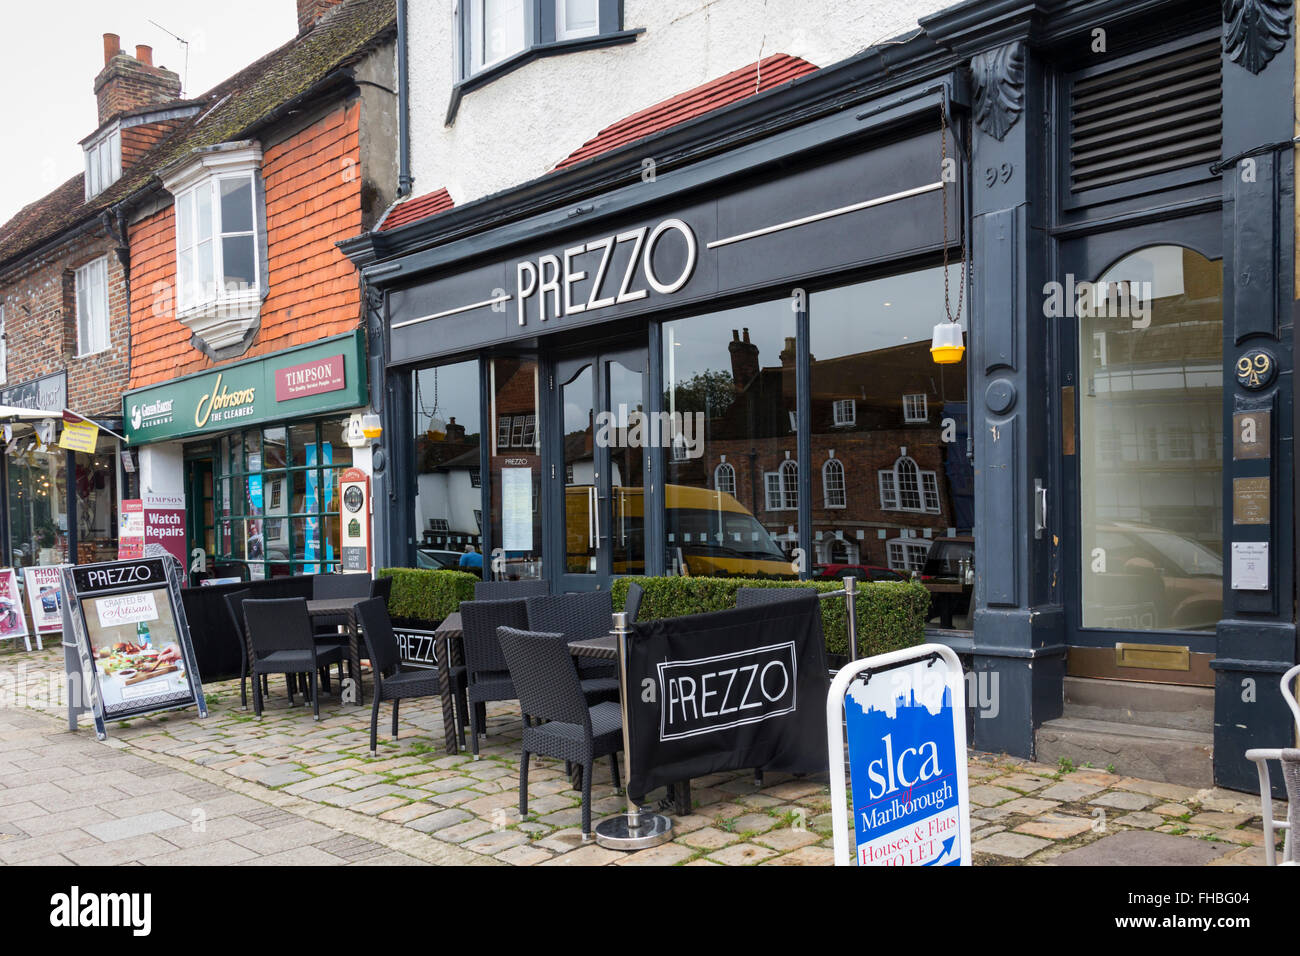 Prezzo, restaurant on Marlborough High Street serving Italian cuisine, including pizzas, part of a chain of 200 outlets. Stock Photo